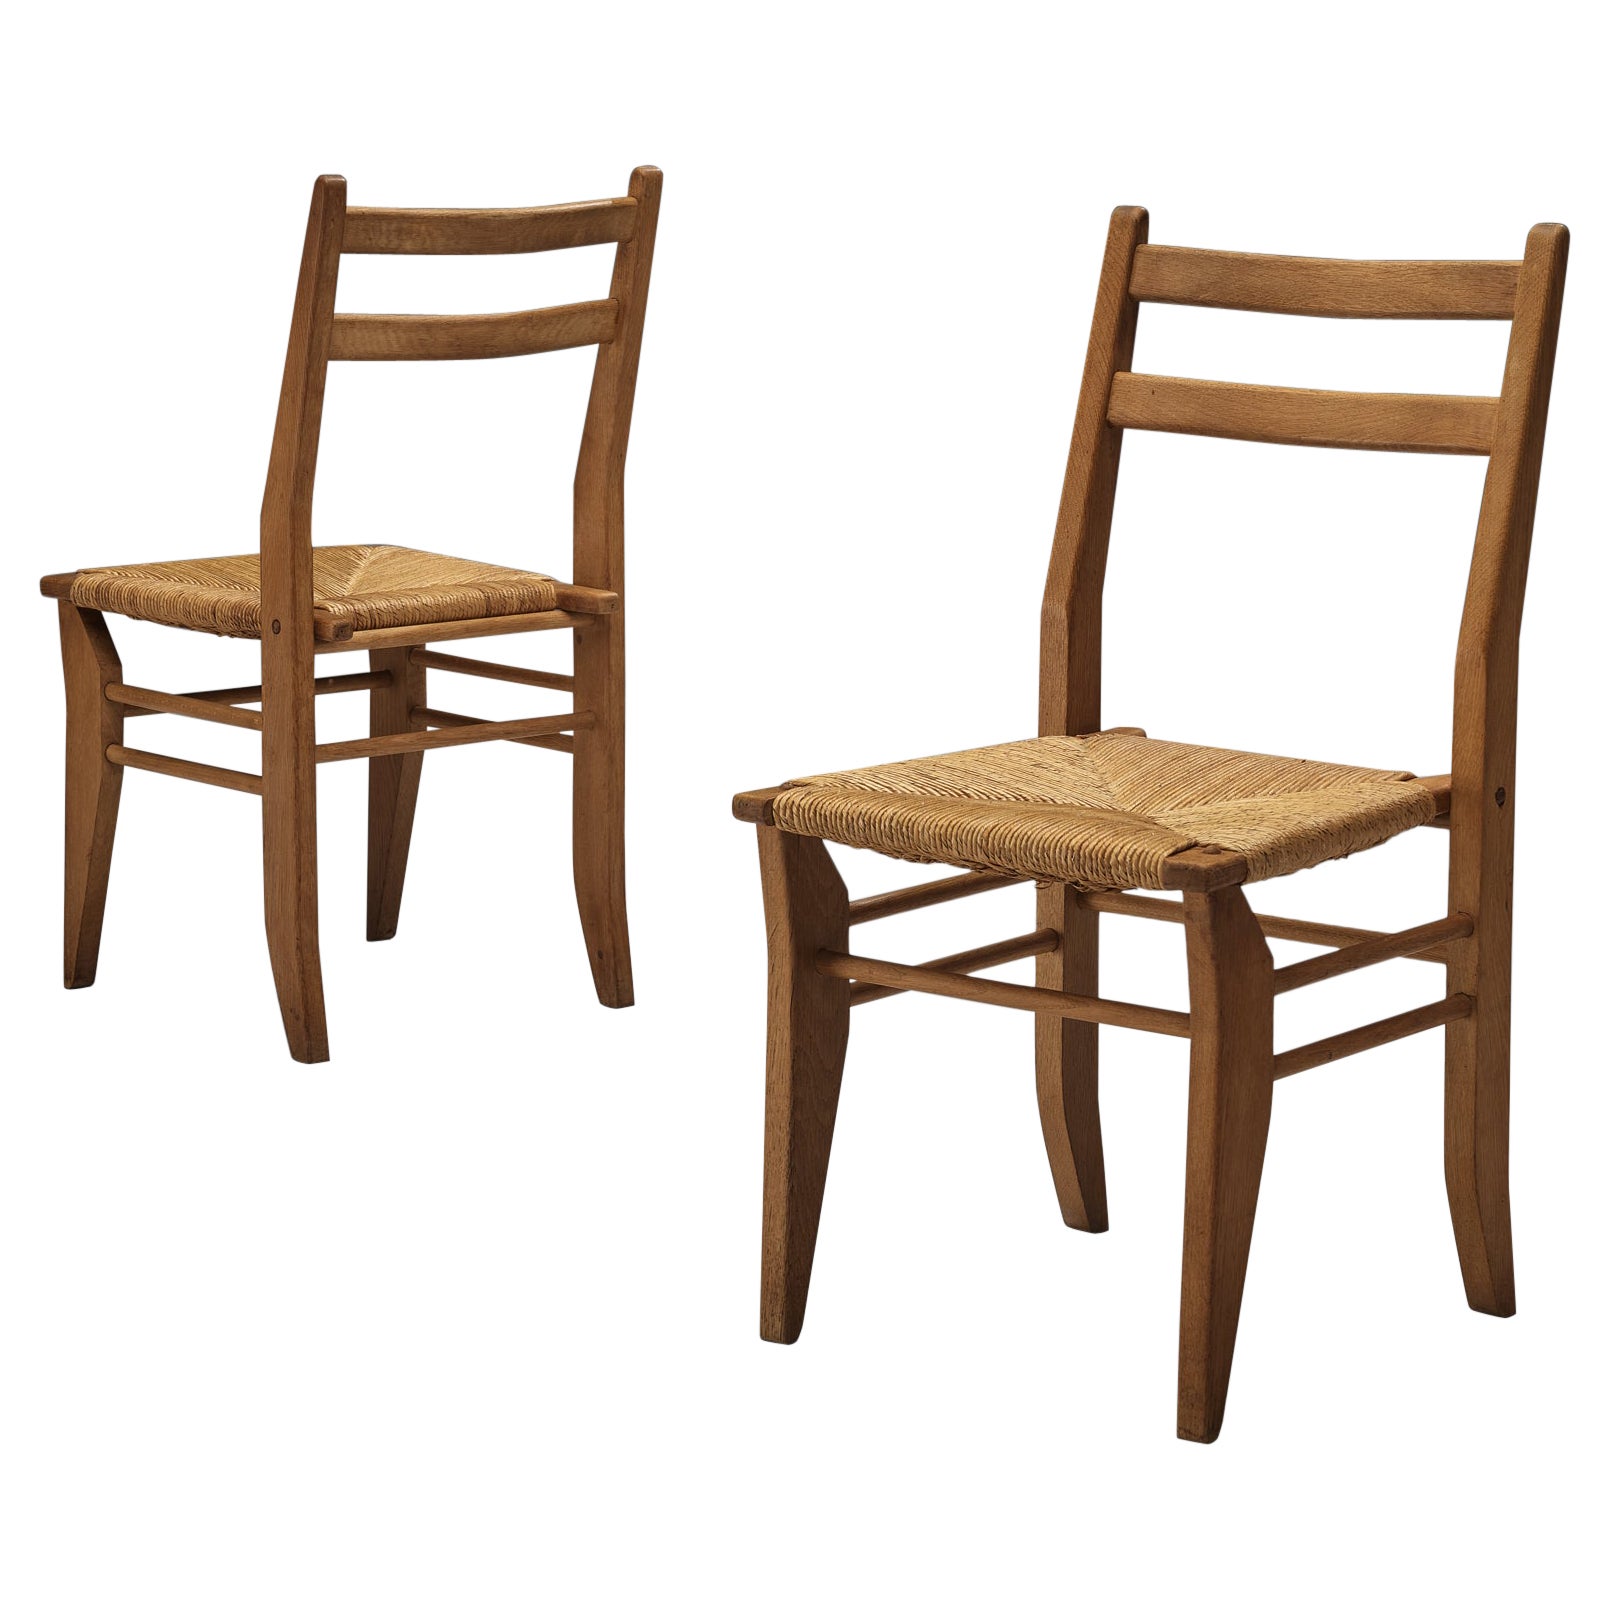 Guillerme & Chambron Pair of Dining Chairs in Oak and Cane